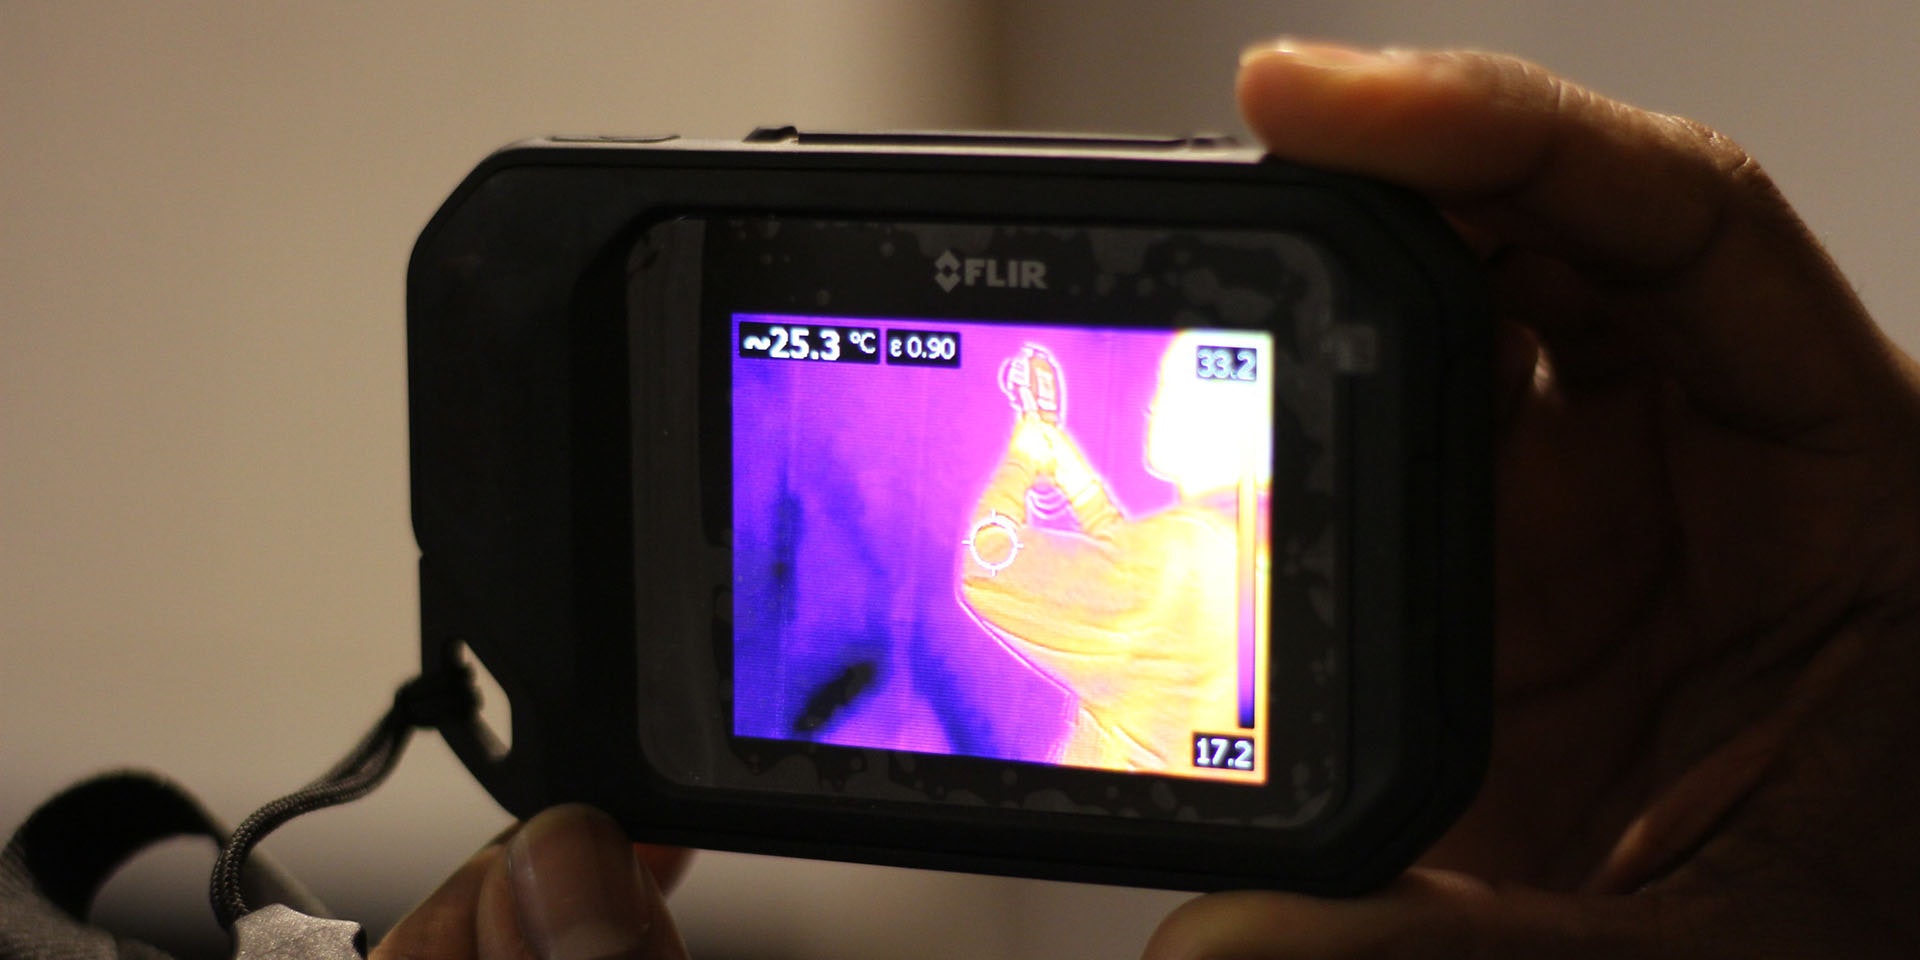 Thermal camera with image of a person on the screen